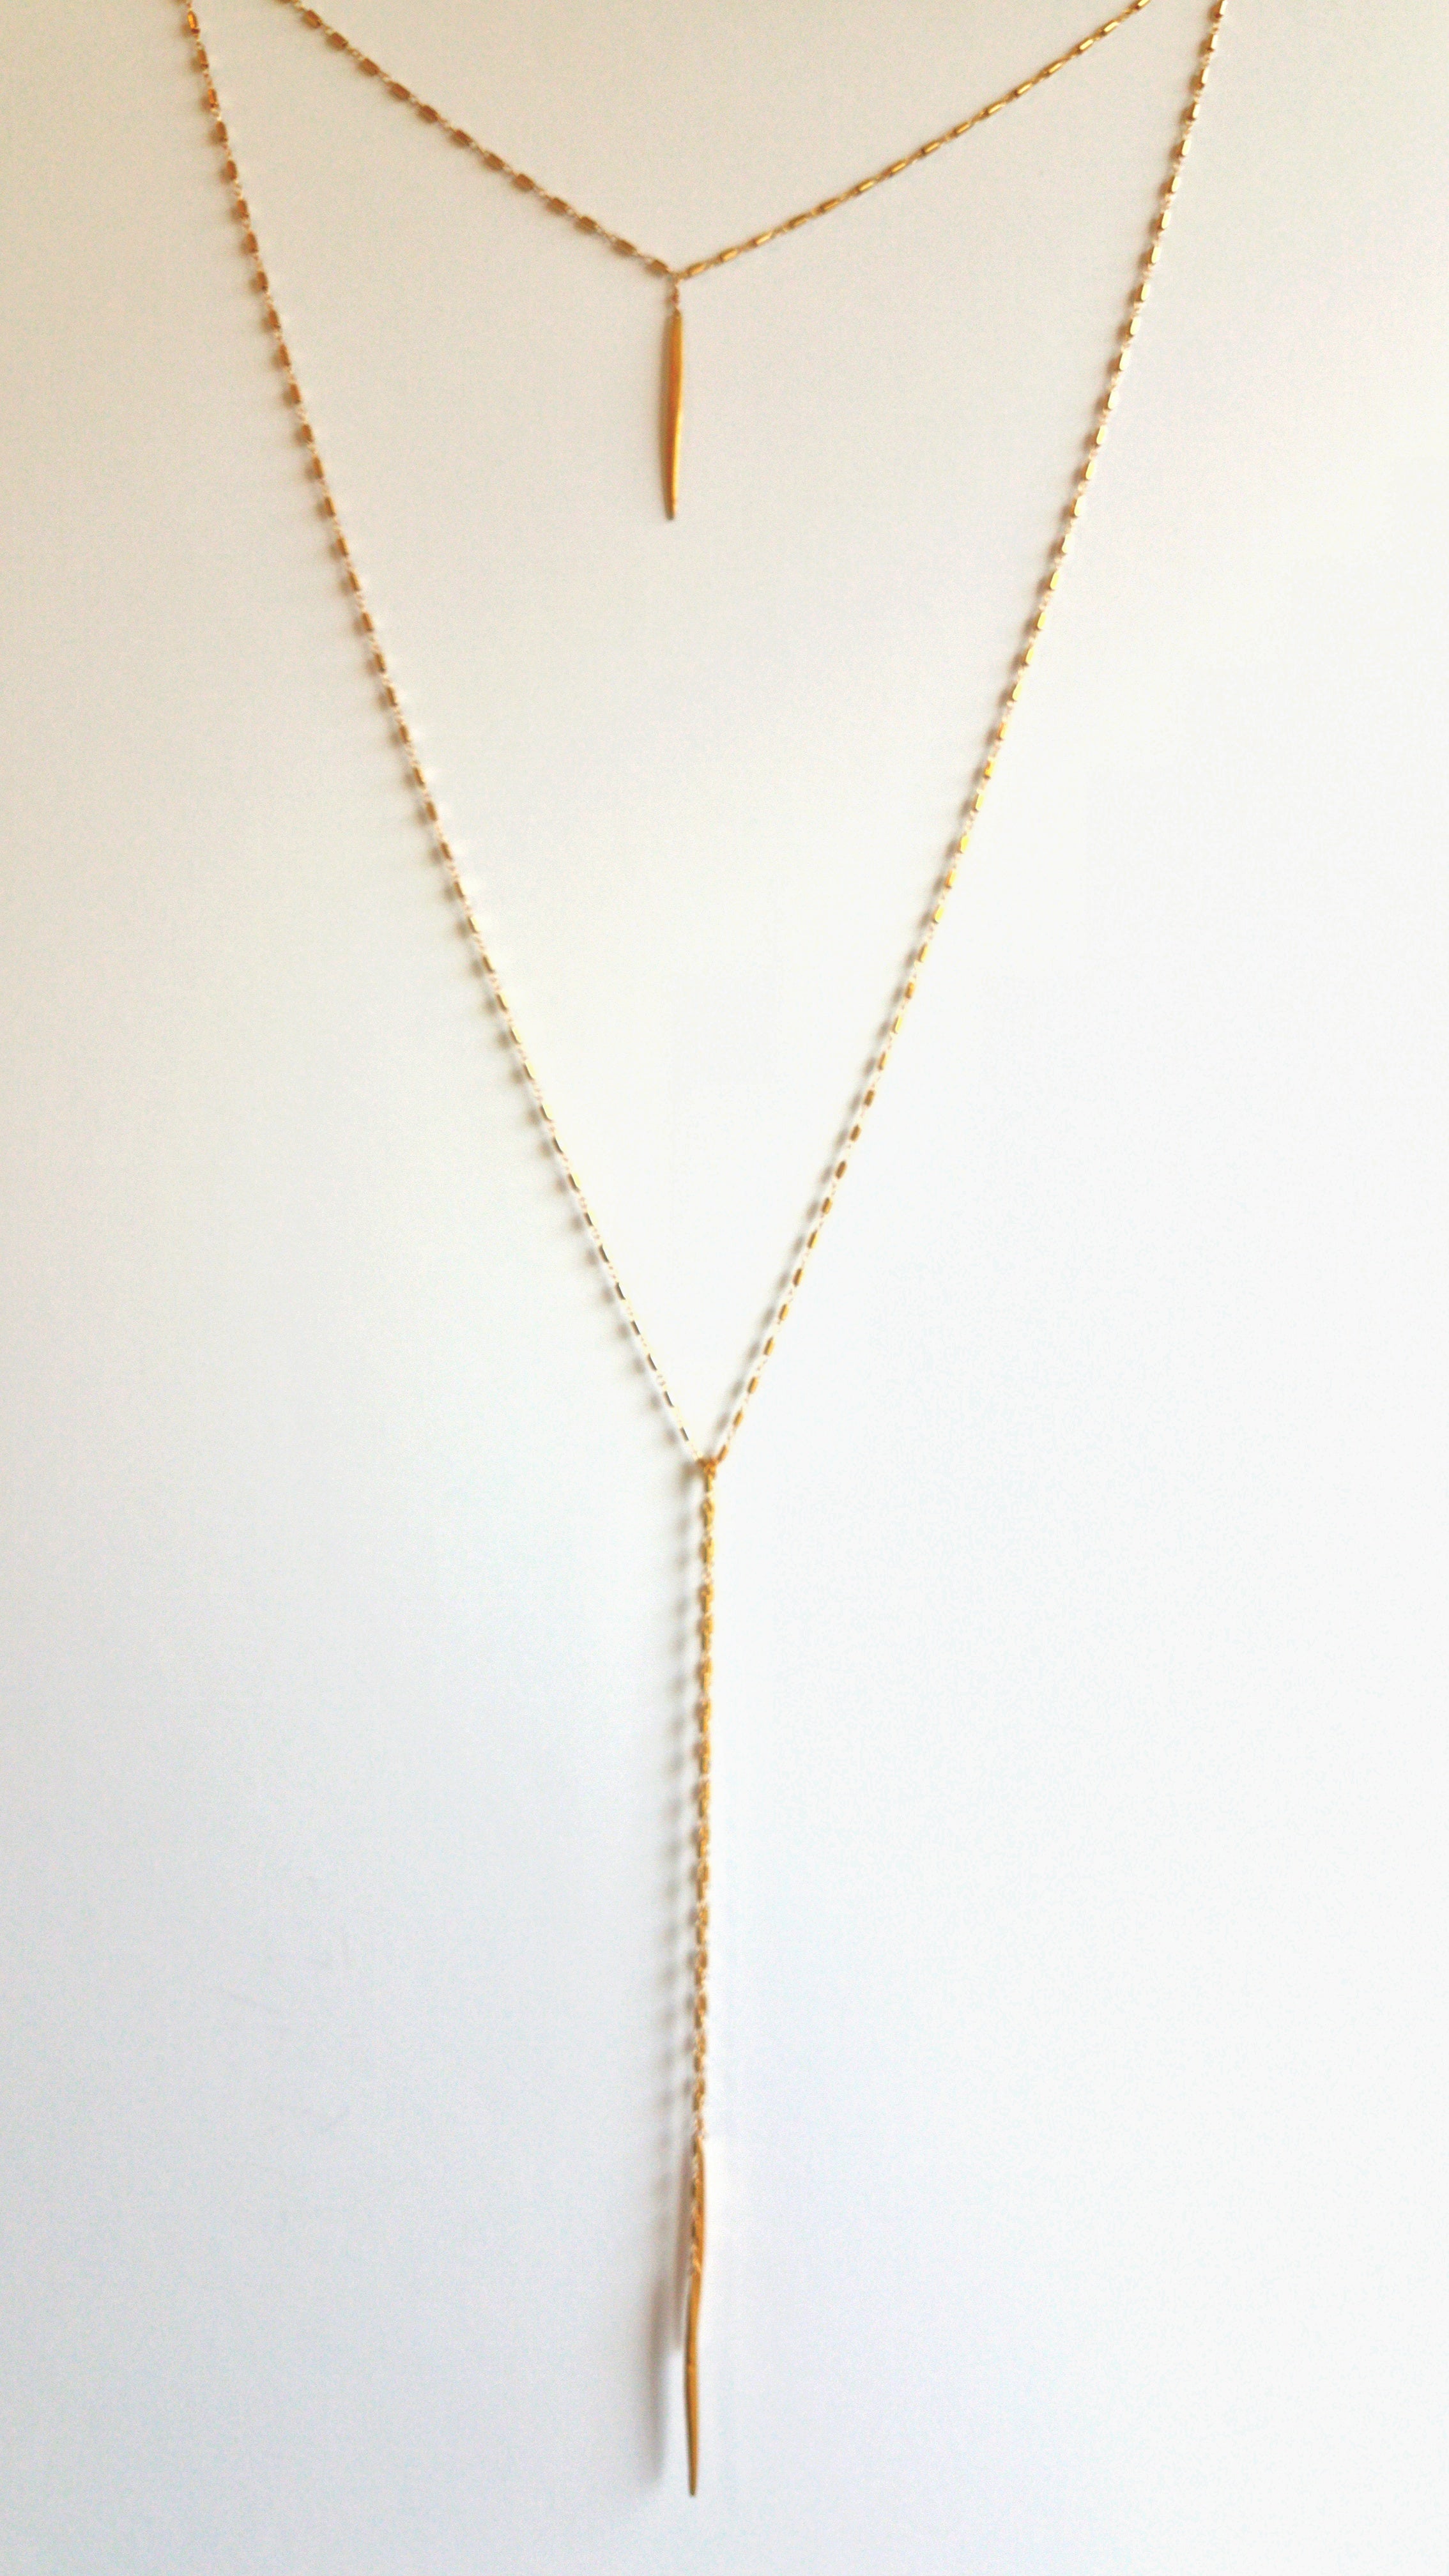 Lasso necklace, specialty cut chain, gold filled, Billie Lorraine, jewelry, gold vermiel 